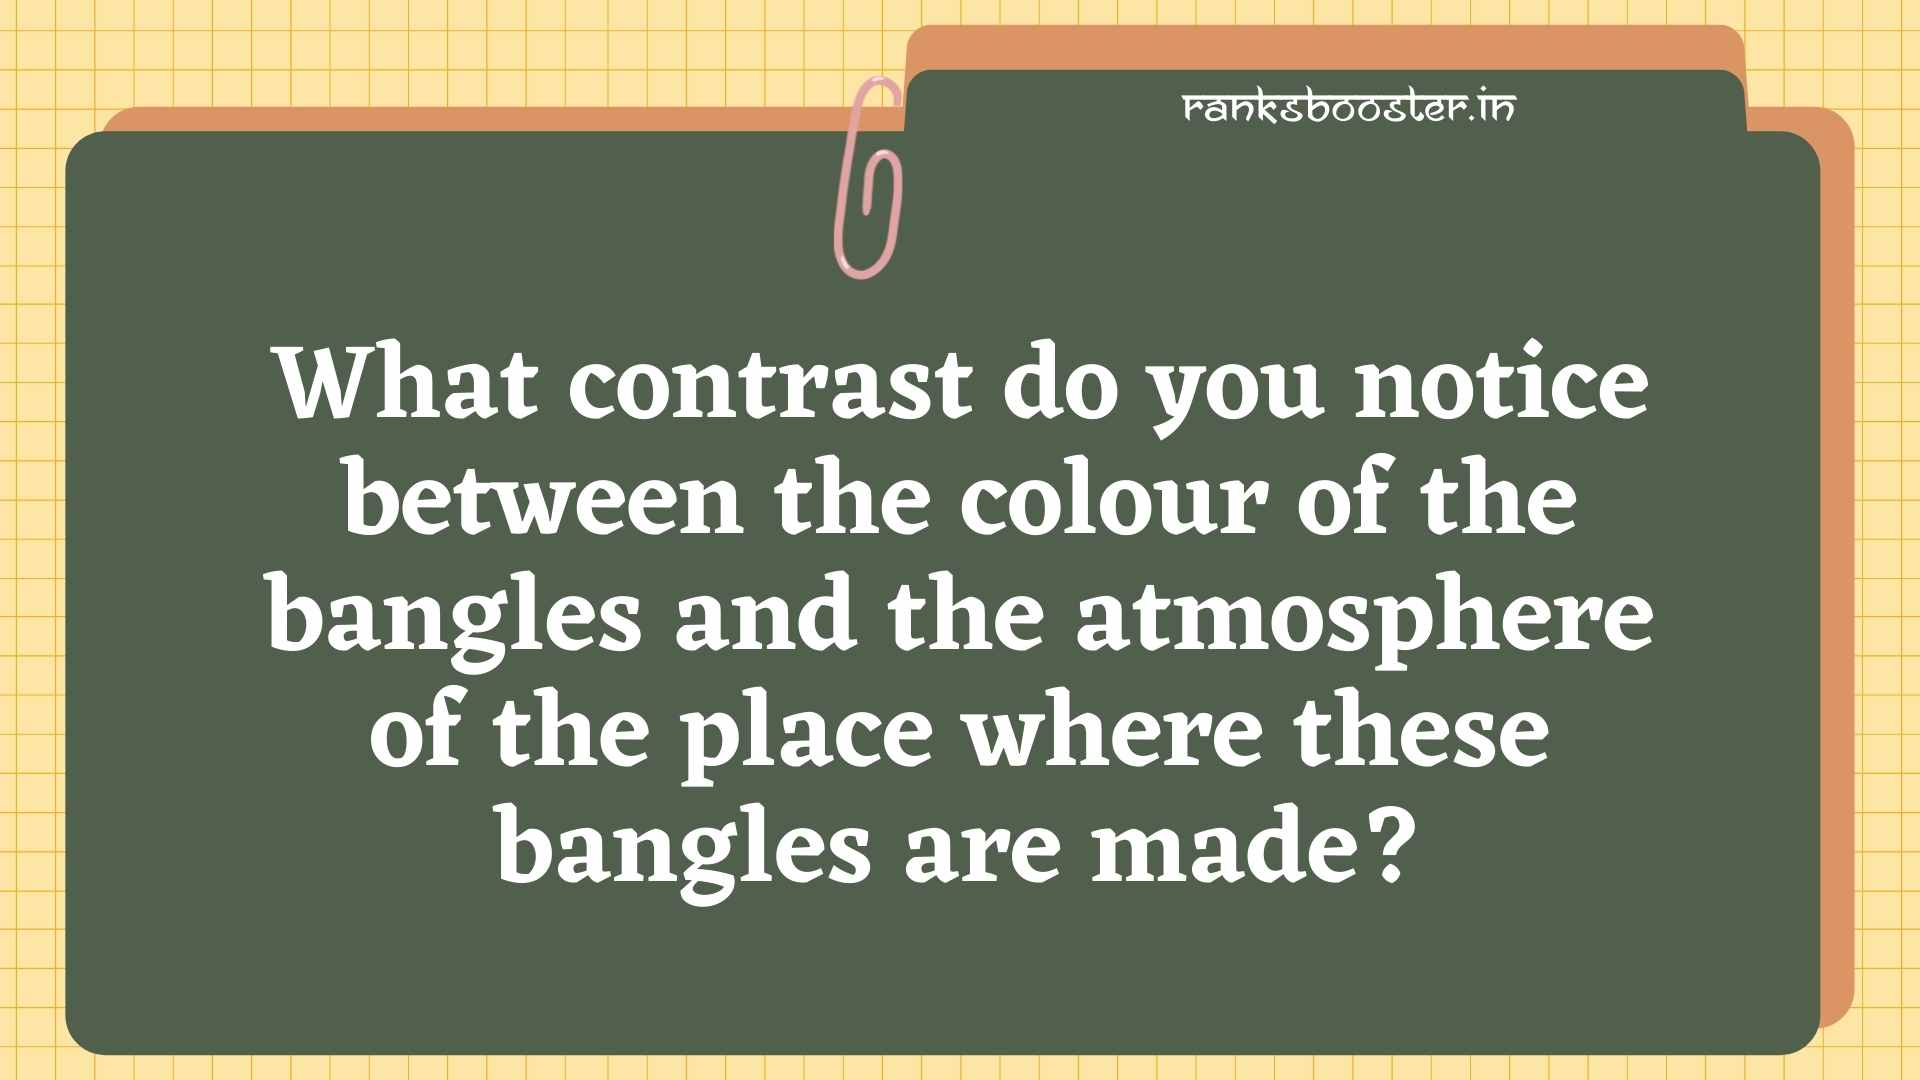 What contrast do you notice between the colour of the bangles and the atmosphere of the place where these bangles are made?